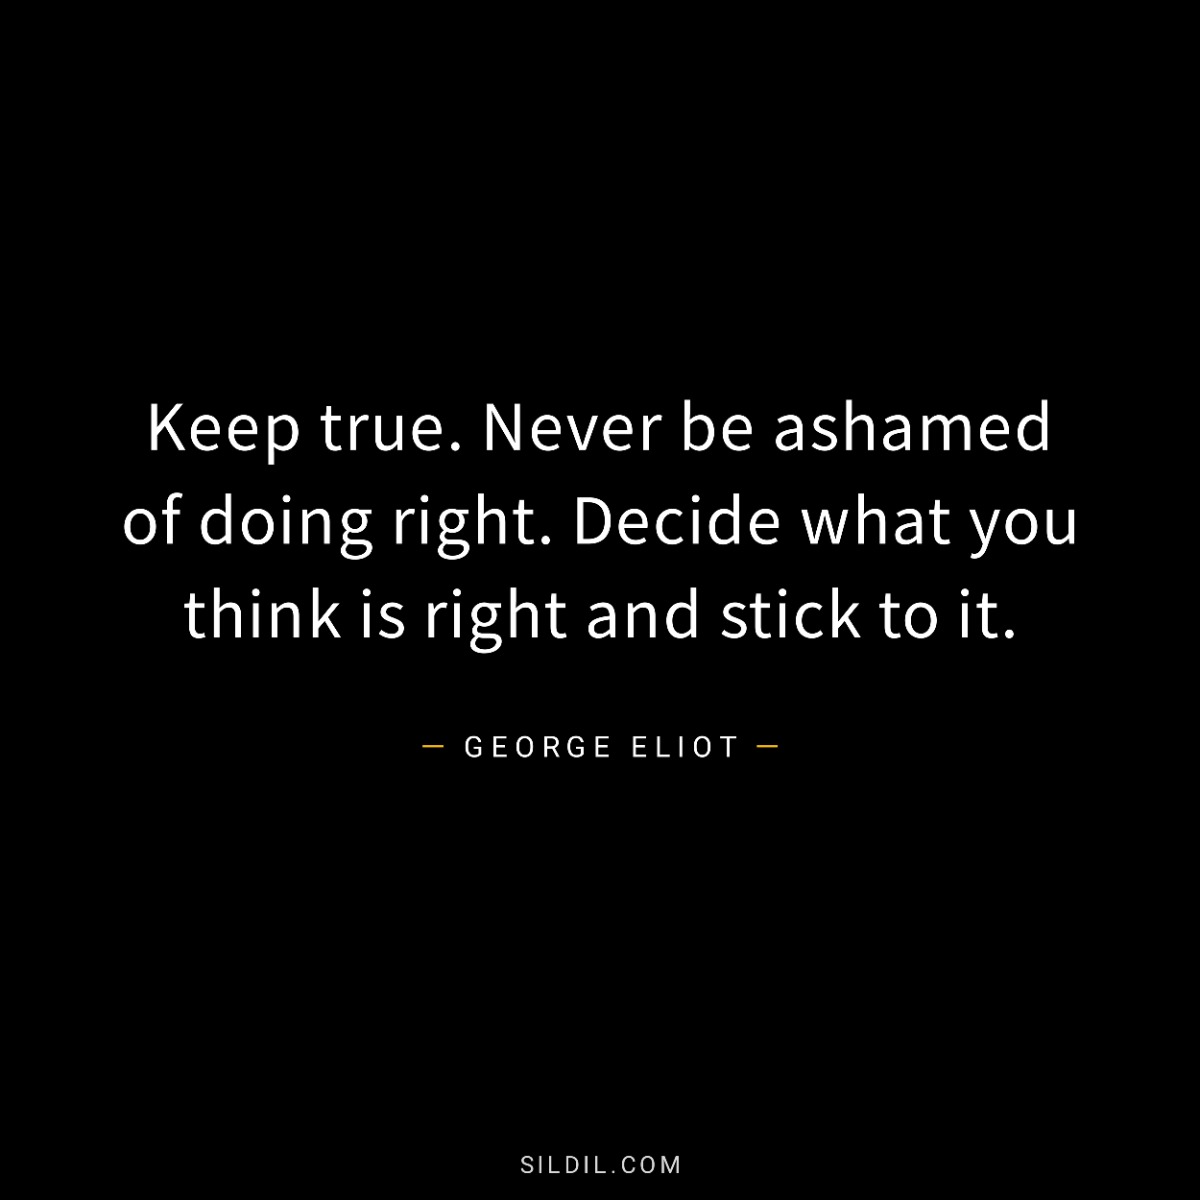 Keep true. Never be ashamed of doing right. Decide what you think is right and stick to it.